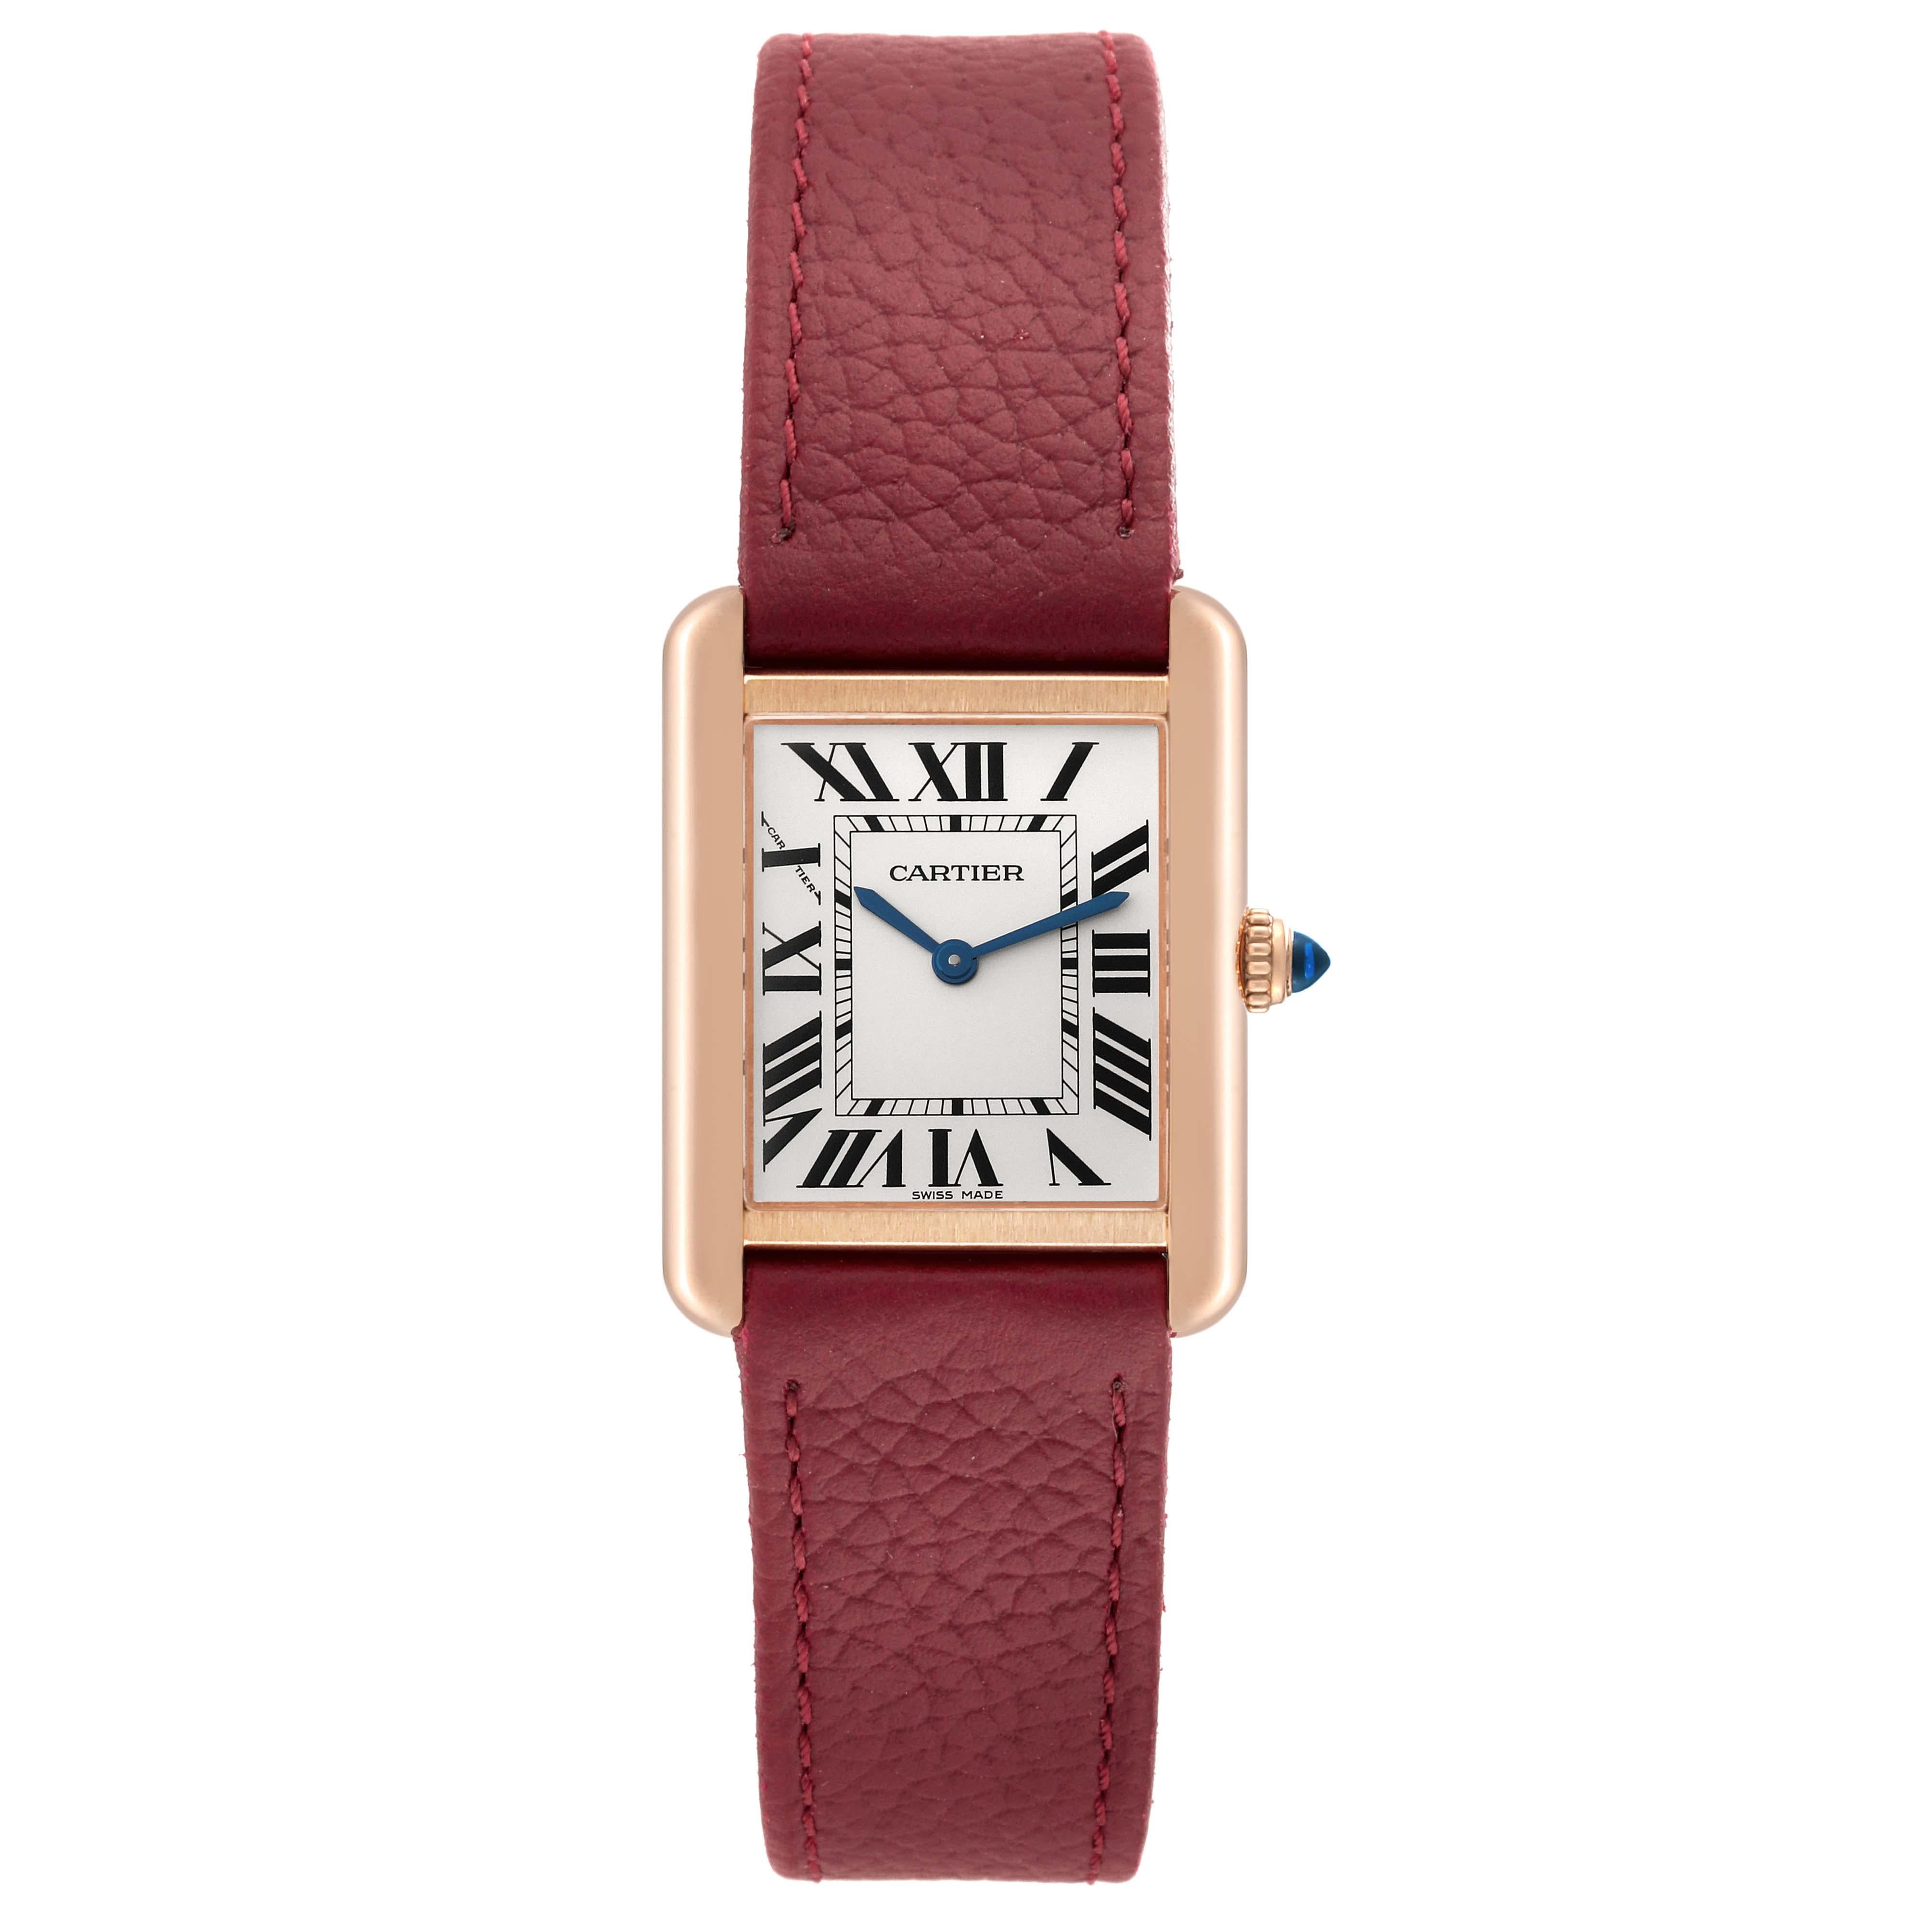 Cartier Tank Solo Silver Dial Rose Gold Steel Ladies Watch W5200024. Quartz movement. 18k rose gold 30.0 x 24.4 mm case with stainless steel caseback. Circular grained crown set with blue spinel cabochon. . Scratch resistant sapphire crystal.